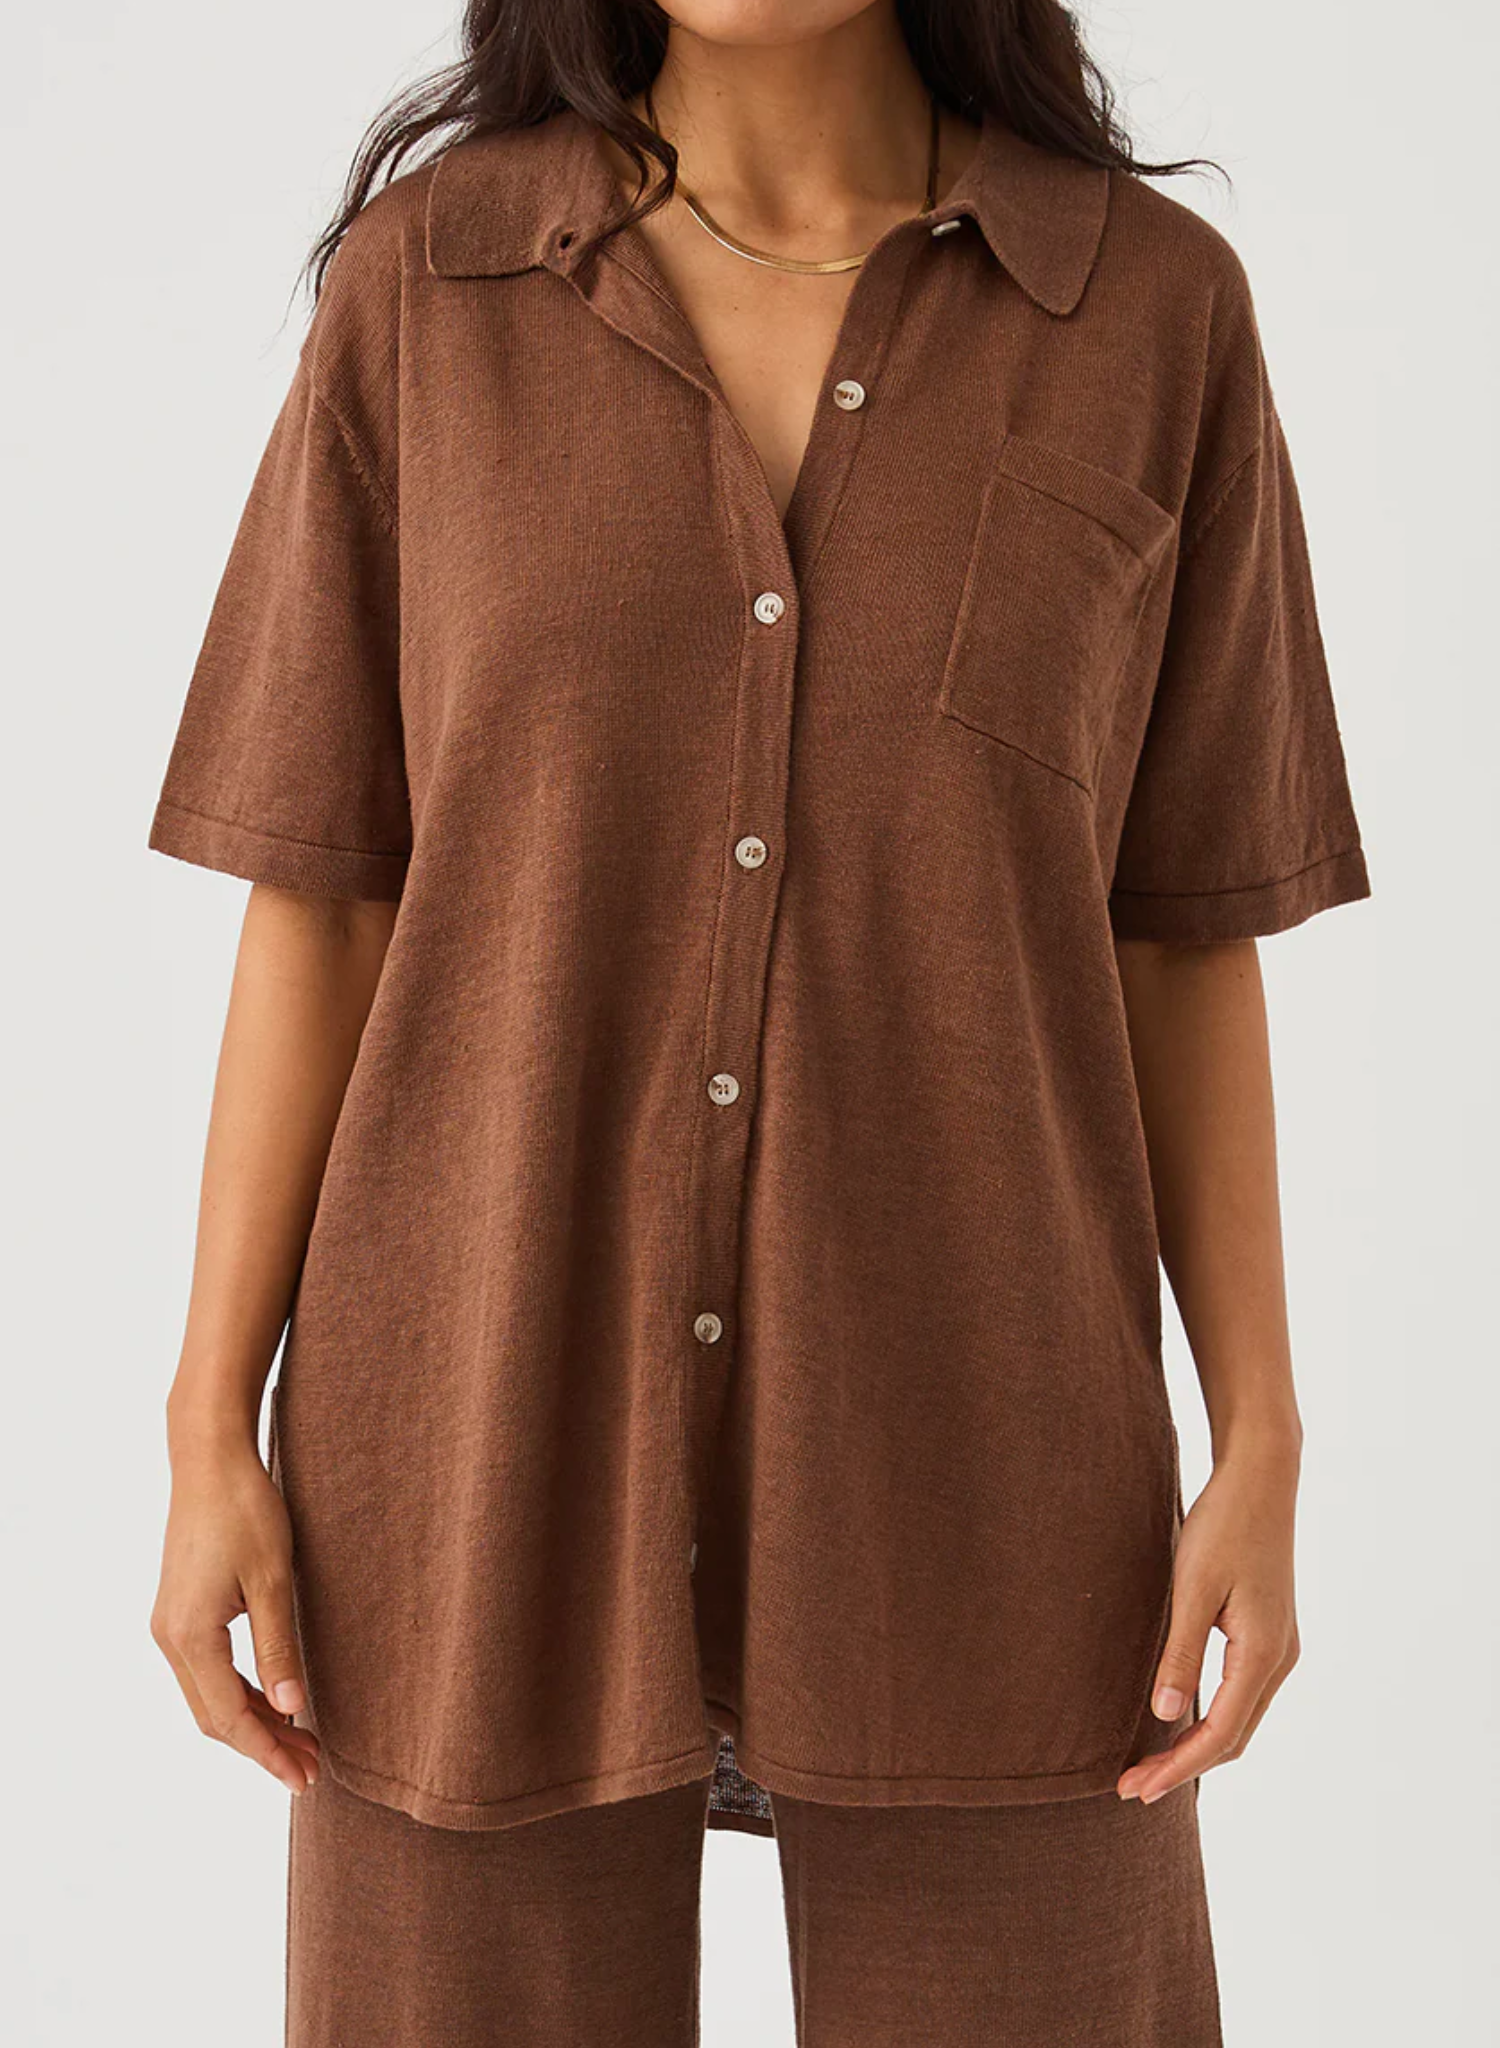 Brie Shirt in Chocolate